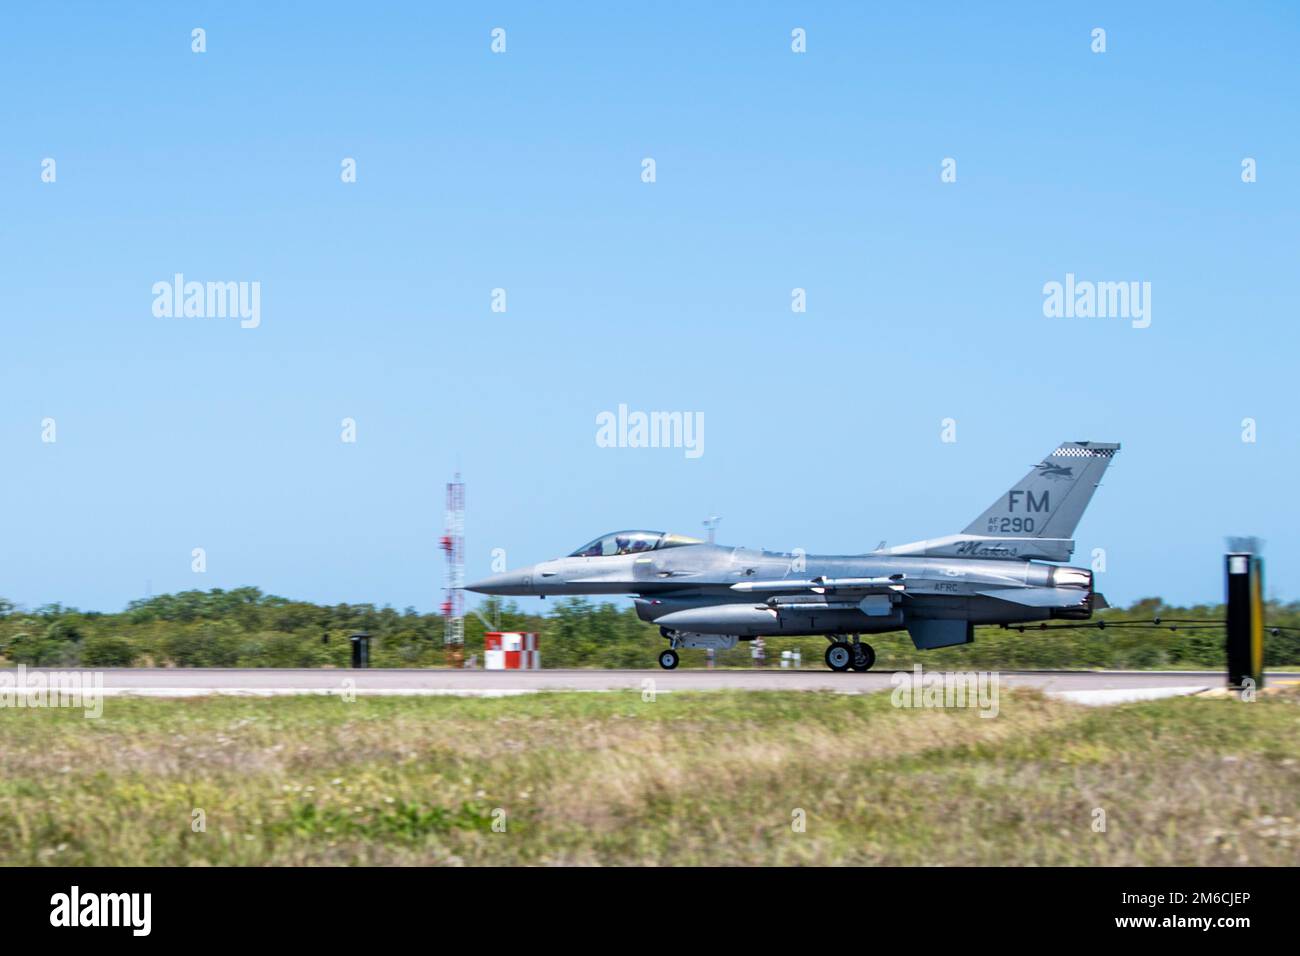 An F-16C Fighting Falcon aircraft assigned to the 482nd Fighter Wing, Homestead Air Reserve Base, Florida, tests a Bak-12 aircraft arresting system at MacDill Air Force Base, Florida, April 22, 2022. The Bak-12 system is used to support fighter aircraft in the event of an in-flight emergency by preventing the aircraft from overrunning on the flightline. Stock Photo